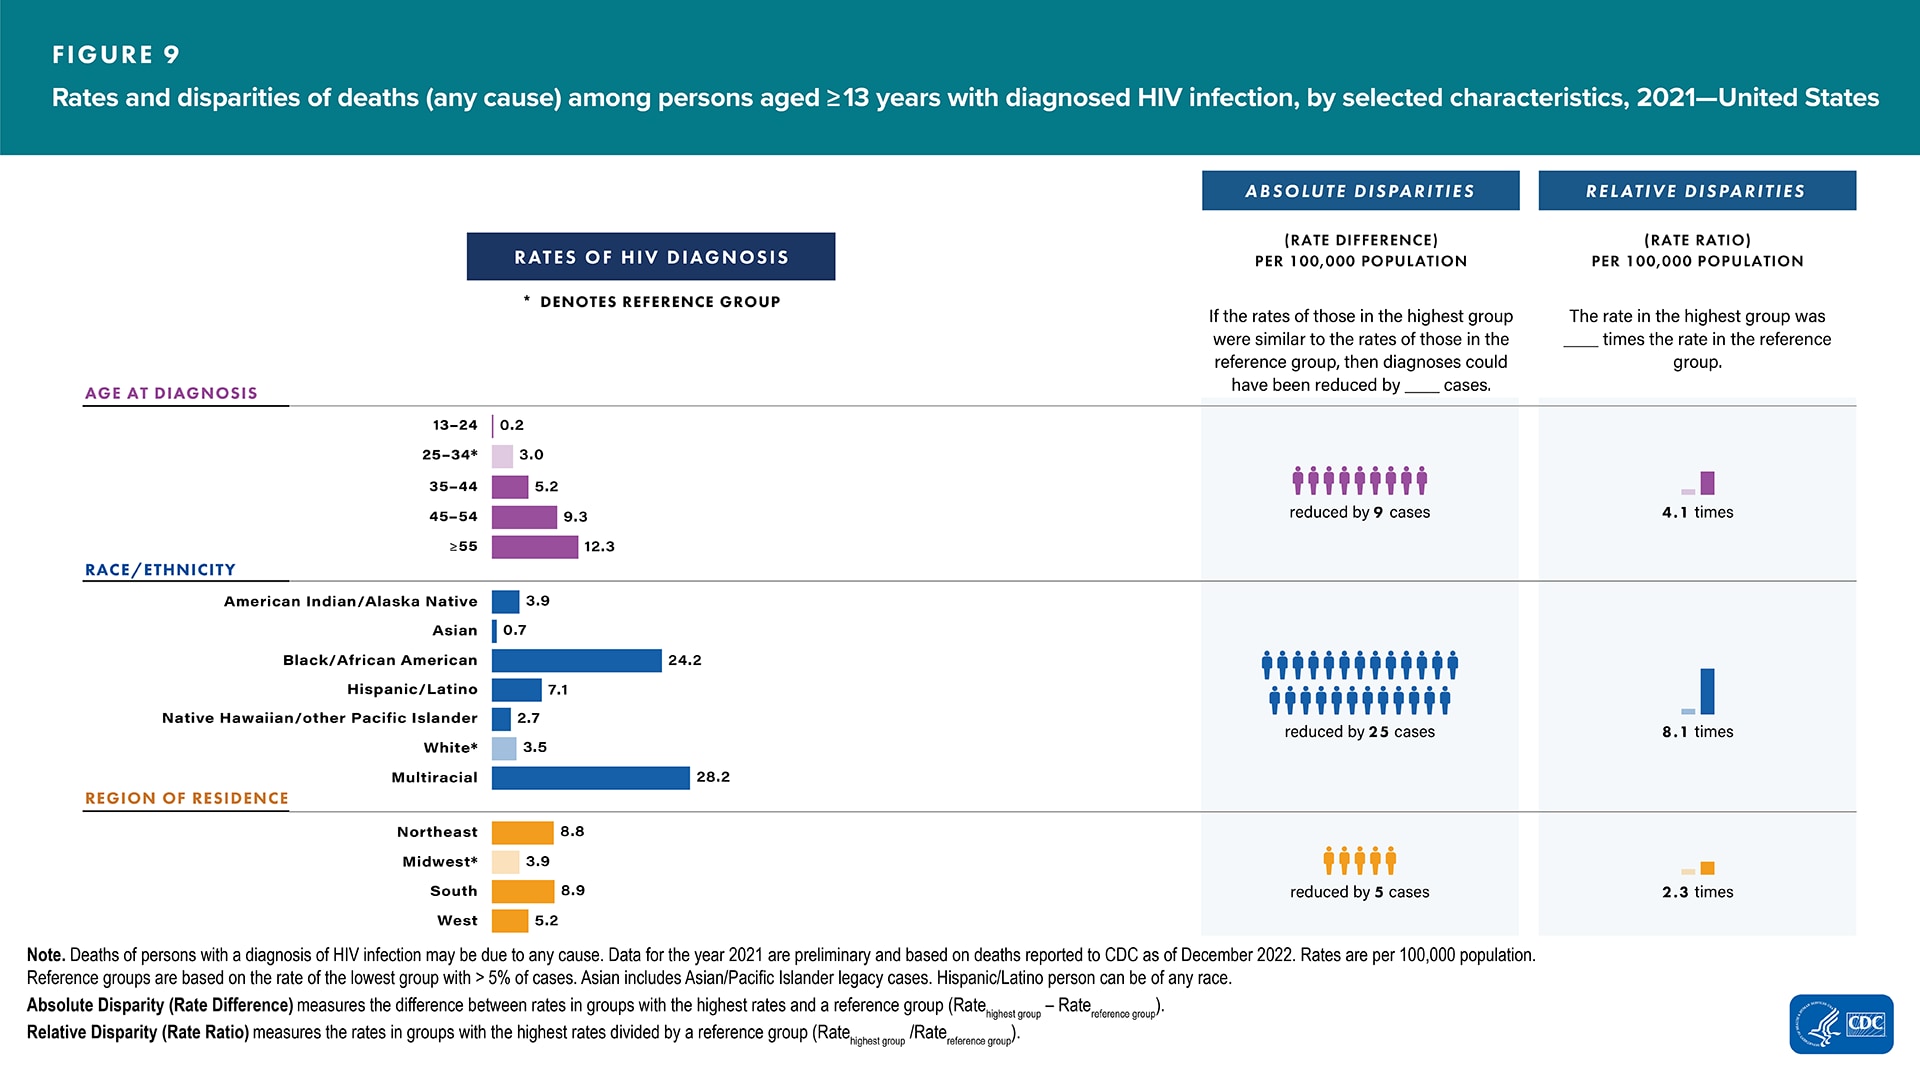 If the rate of deaths among persons aged ≥55 years with diagnosed HIV infection was similar to the rate among persons aged 25–34 years (3.0), then deaths could have been reduced by 9 per 100,000 population. The rate of death among persons aged ≥55 years was 4.1 times the rate among persons aged 25–34 years.